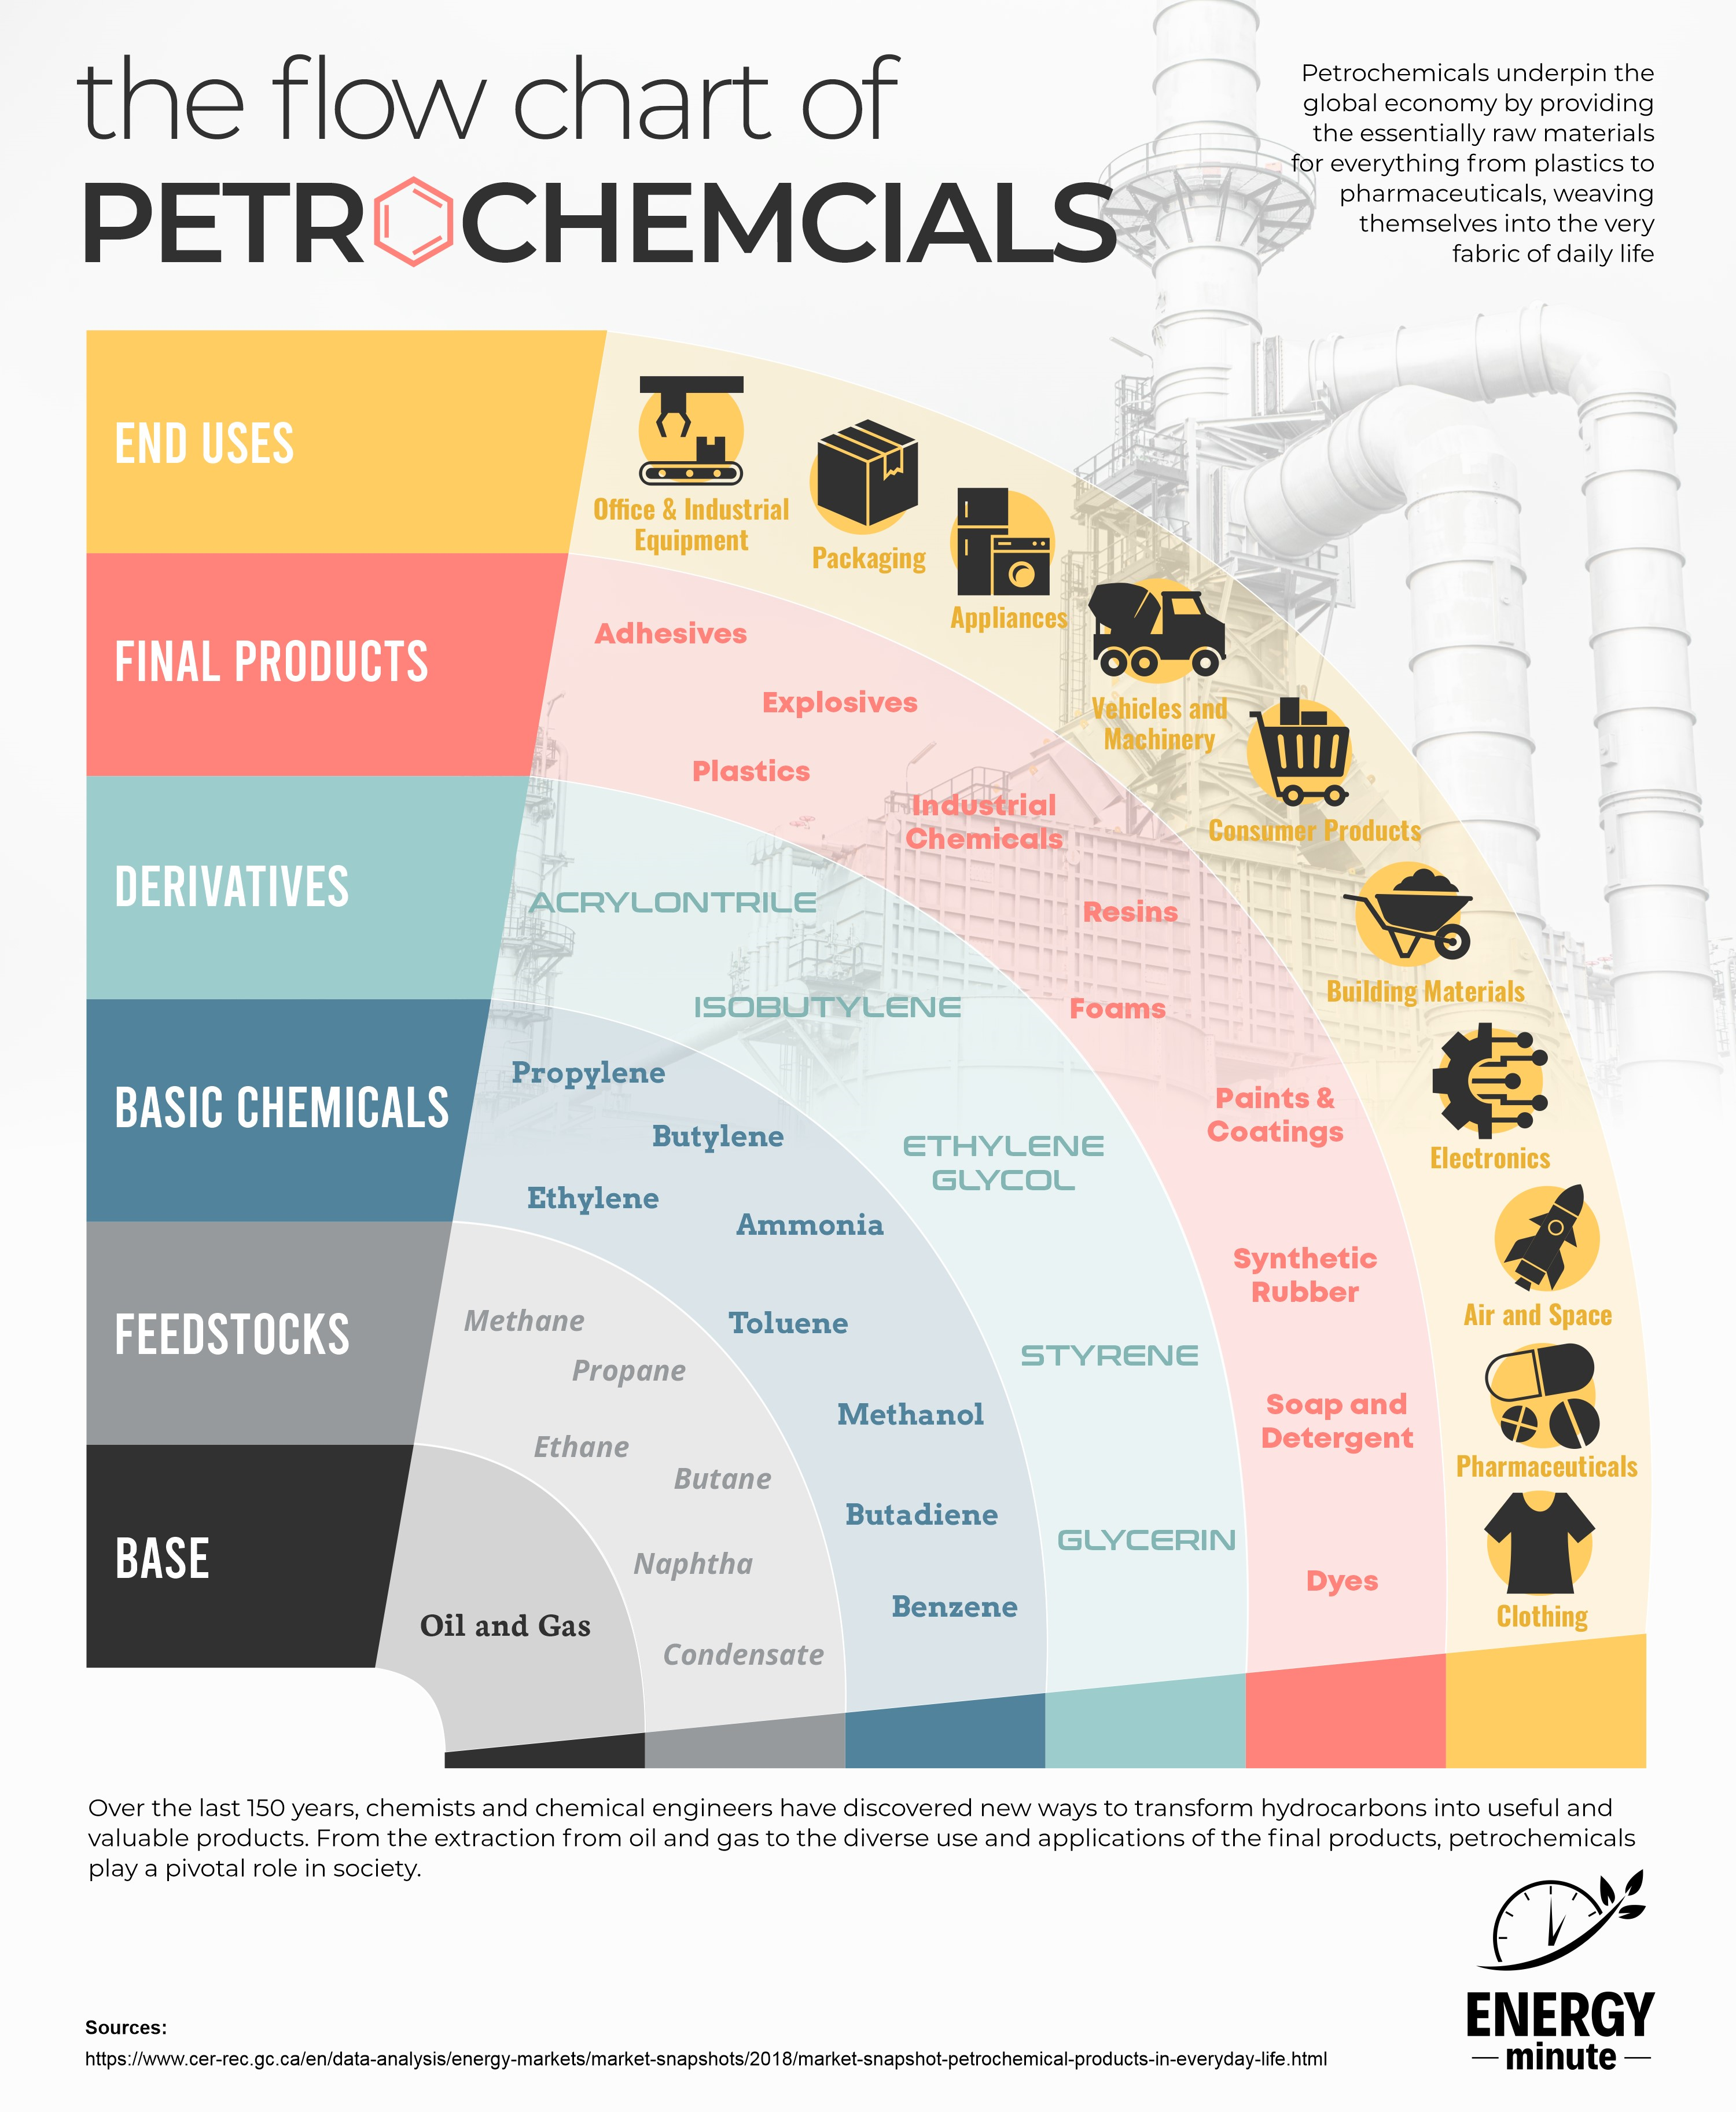 The flow chart of petrochemicals